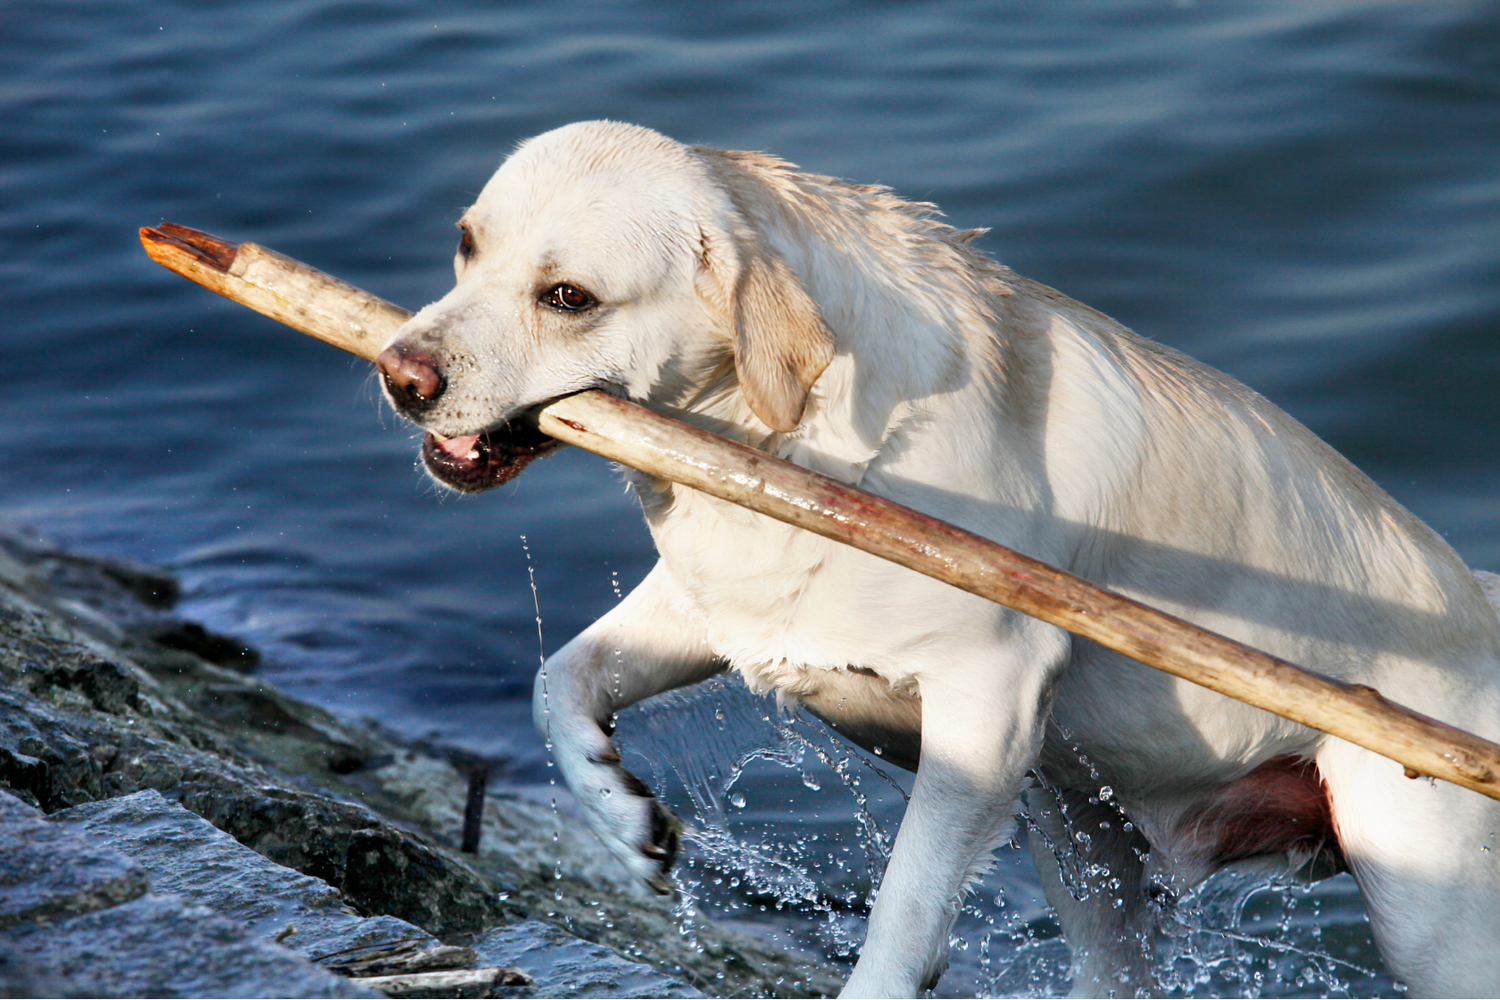 Dog in lake with a stick in its mouth